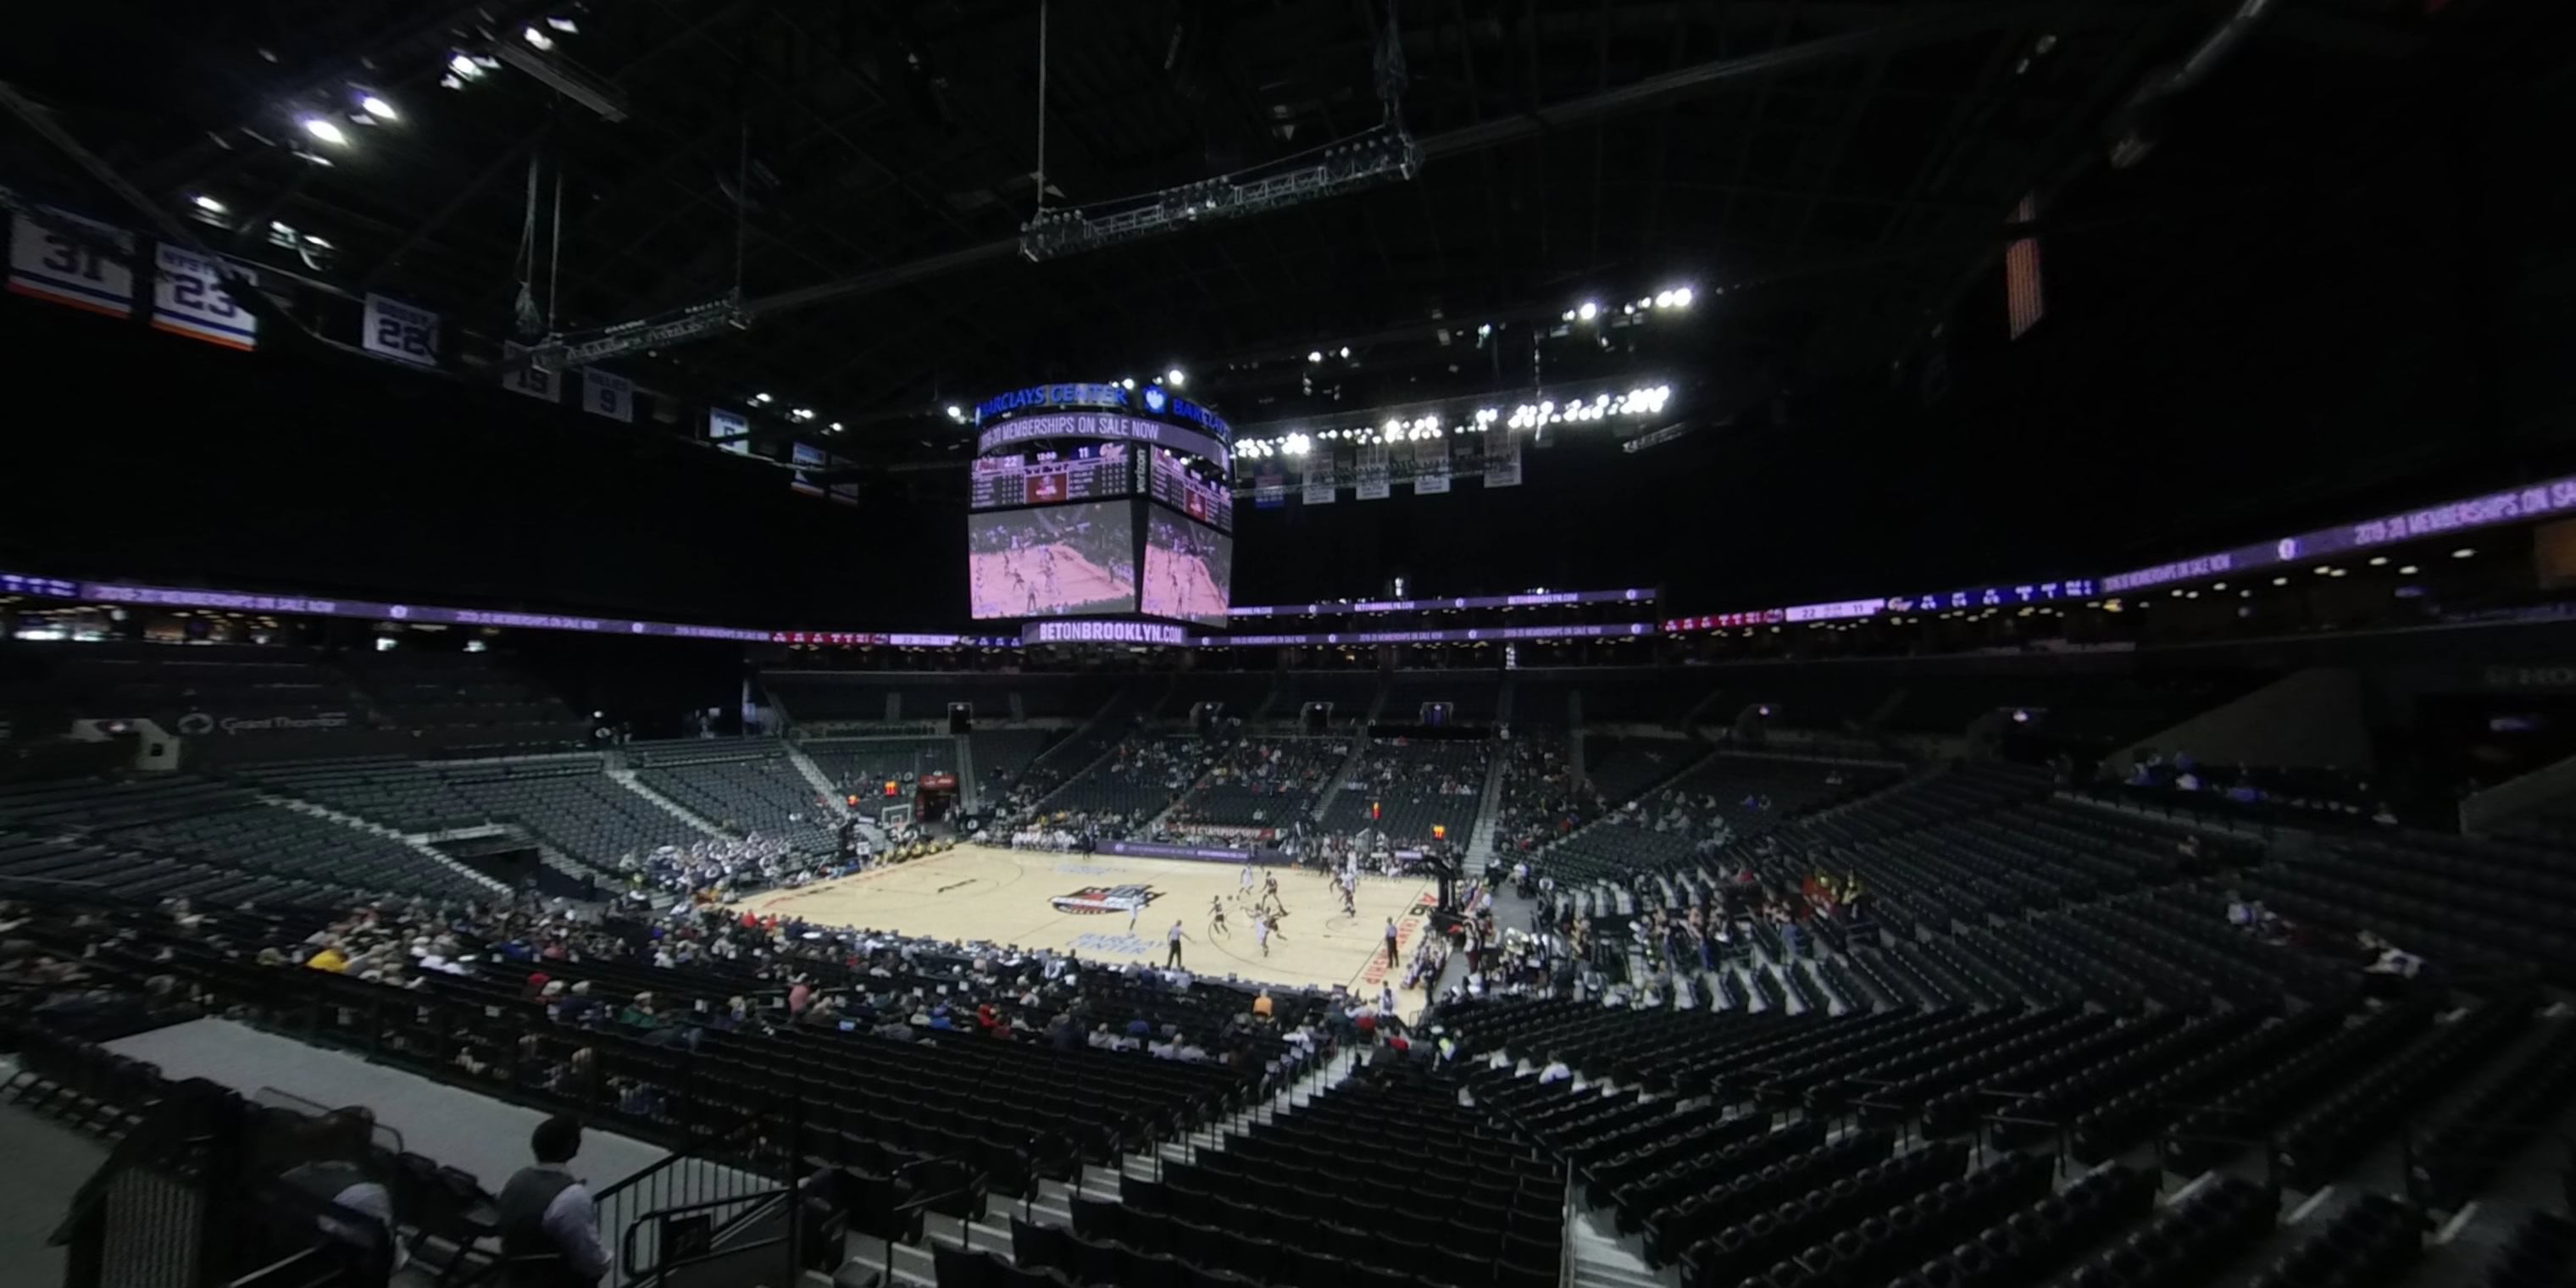 section 121 panoramic seat view  for basketball - barclays center